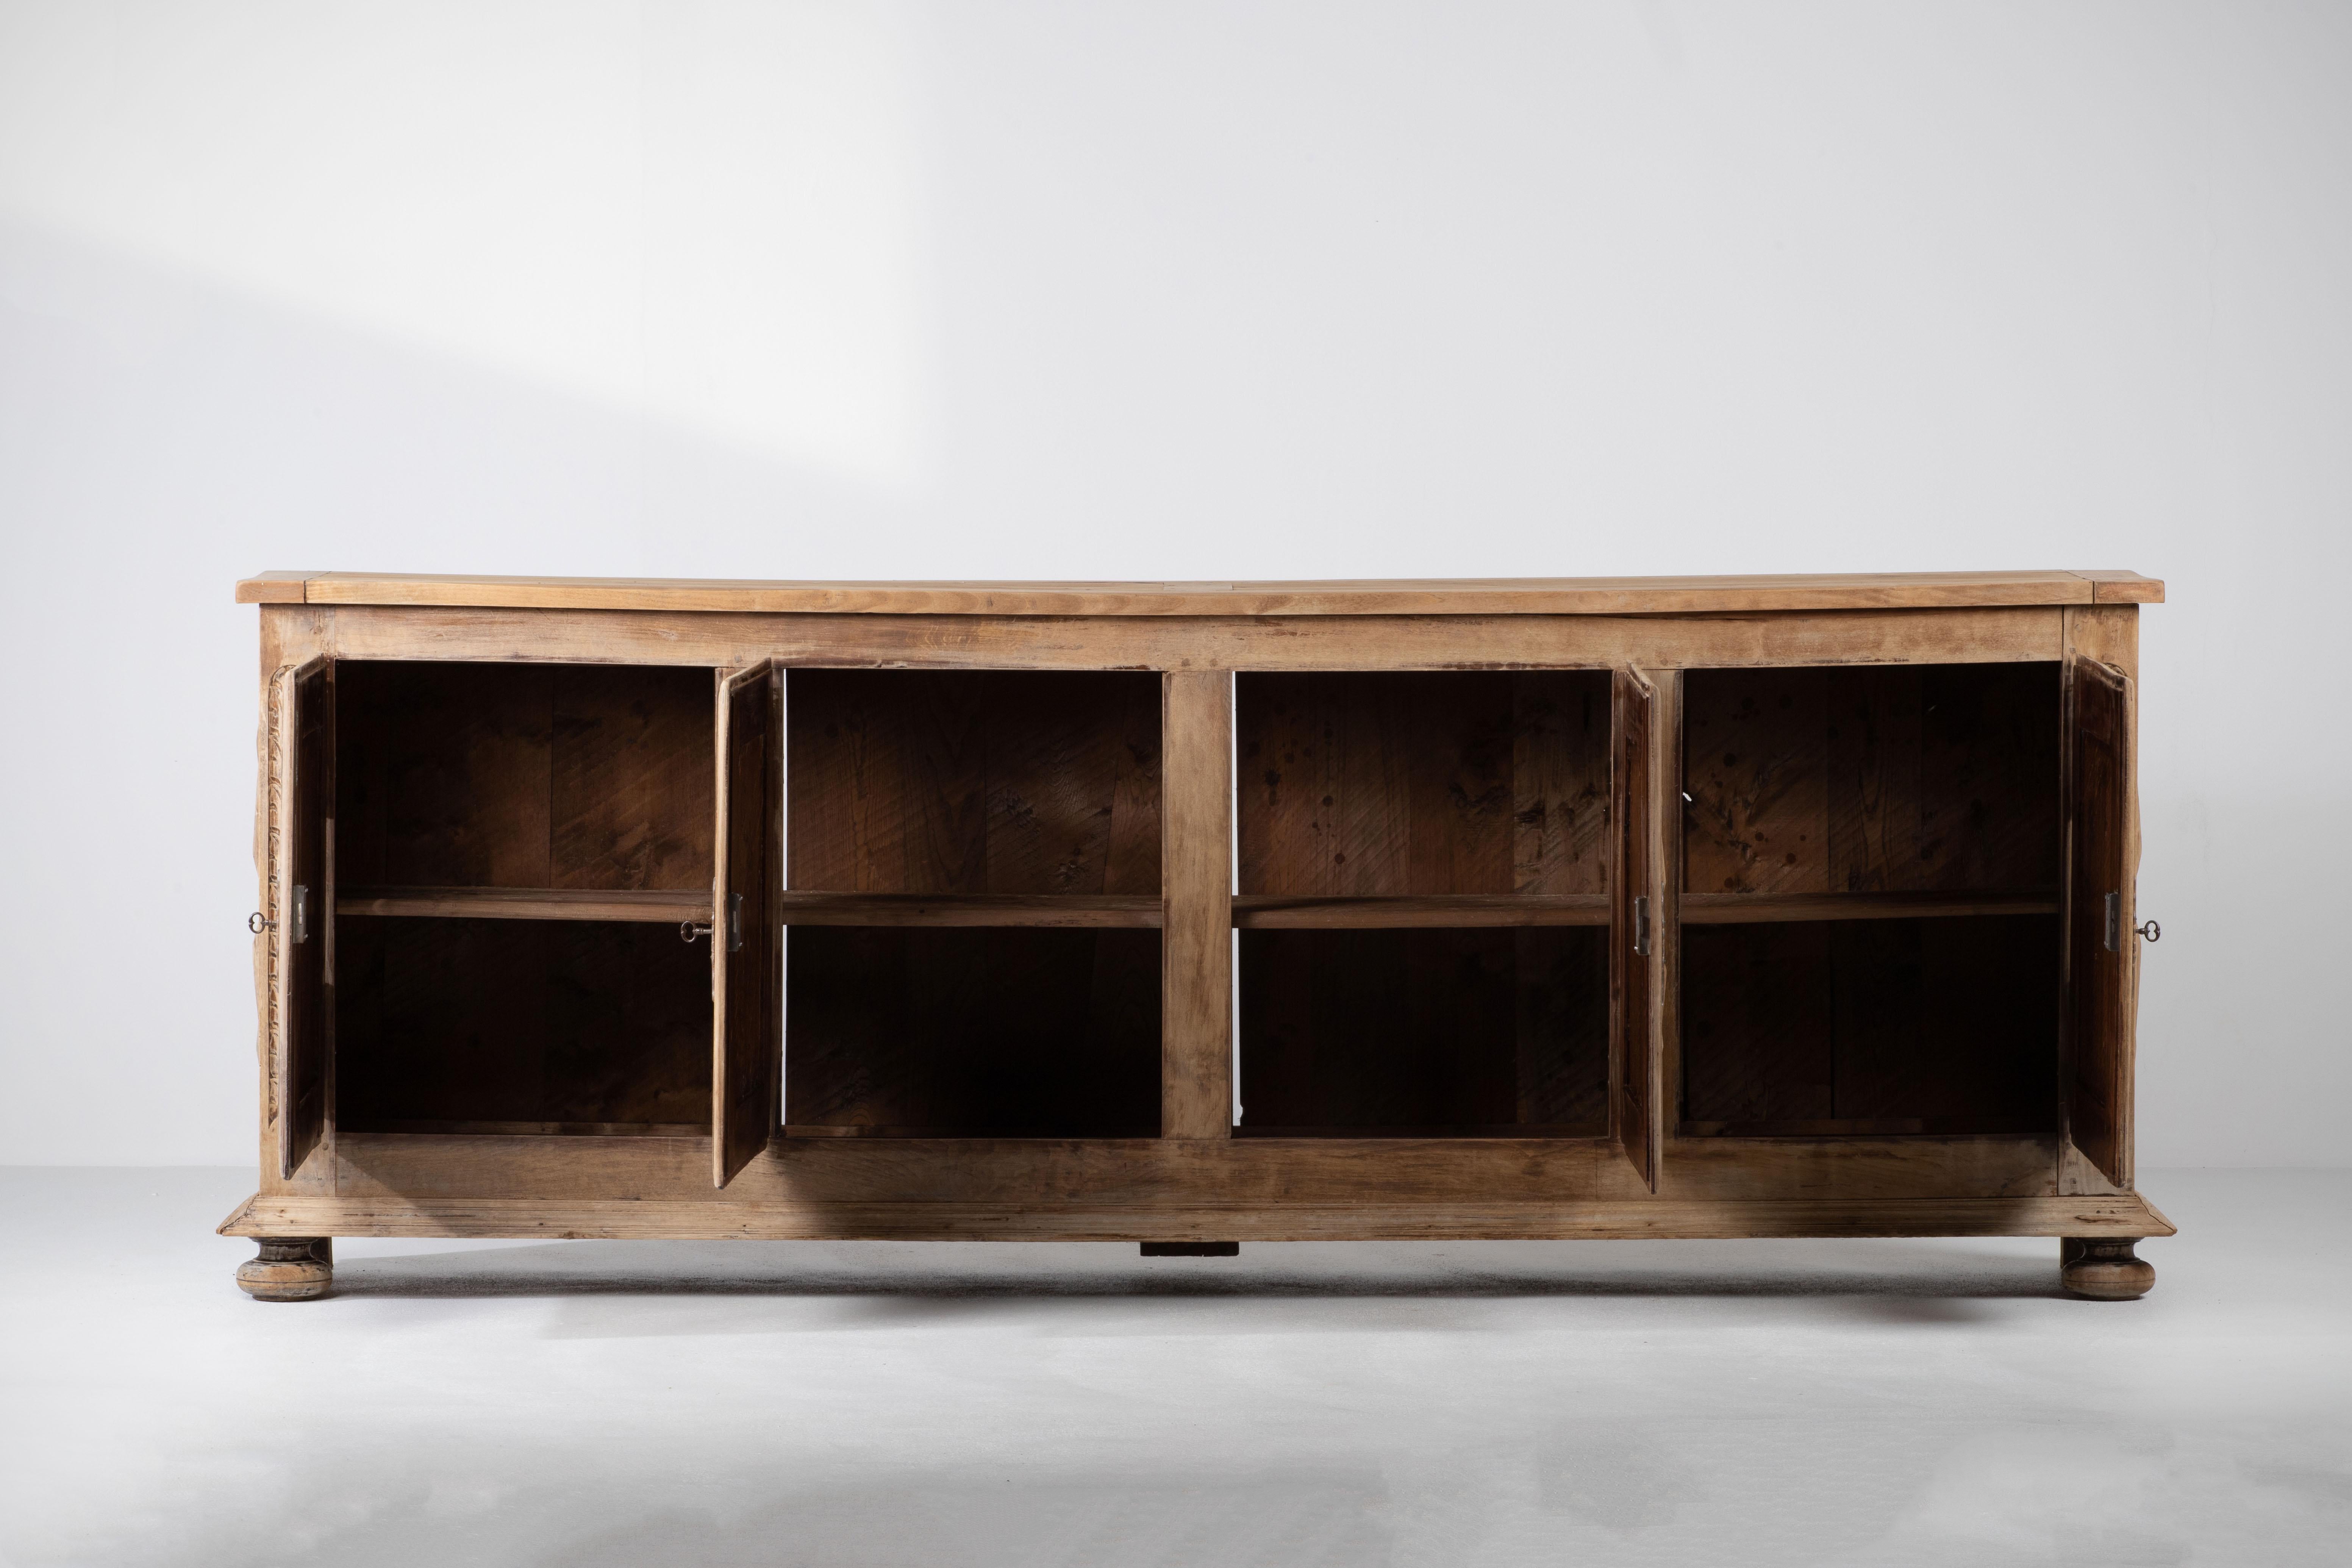 Brutalist Solid Elm Sideboard, Louis XIII style
The buffet features stunning diamond carved door panels. It offers ample storage, with shelve behind the doors.  The sideboard is in good original condition, with minor wear consistent with age and